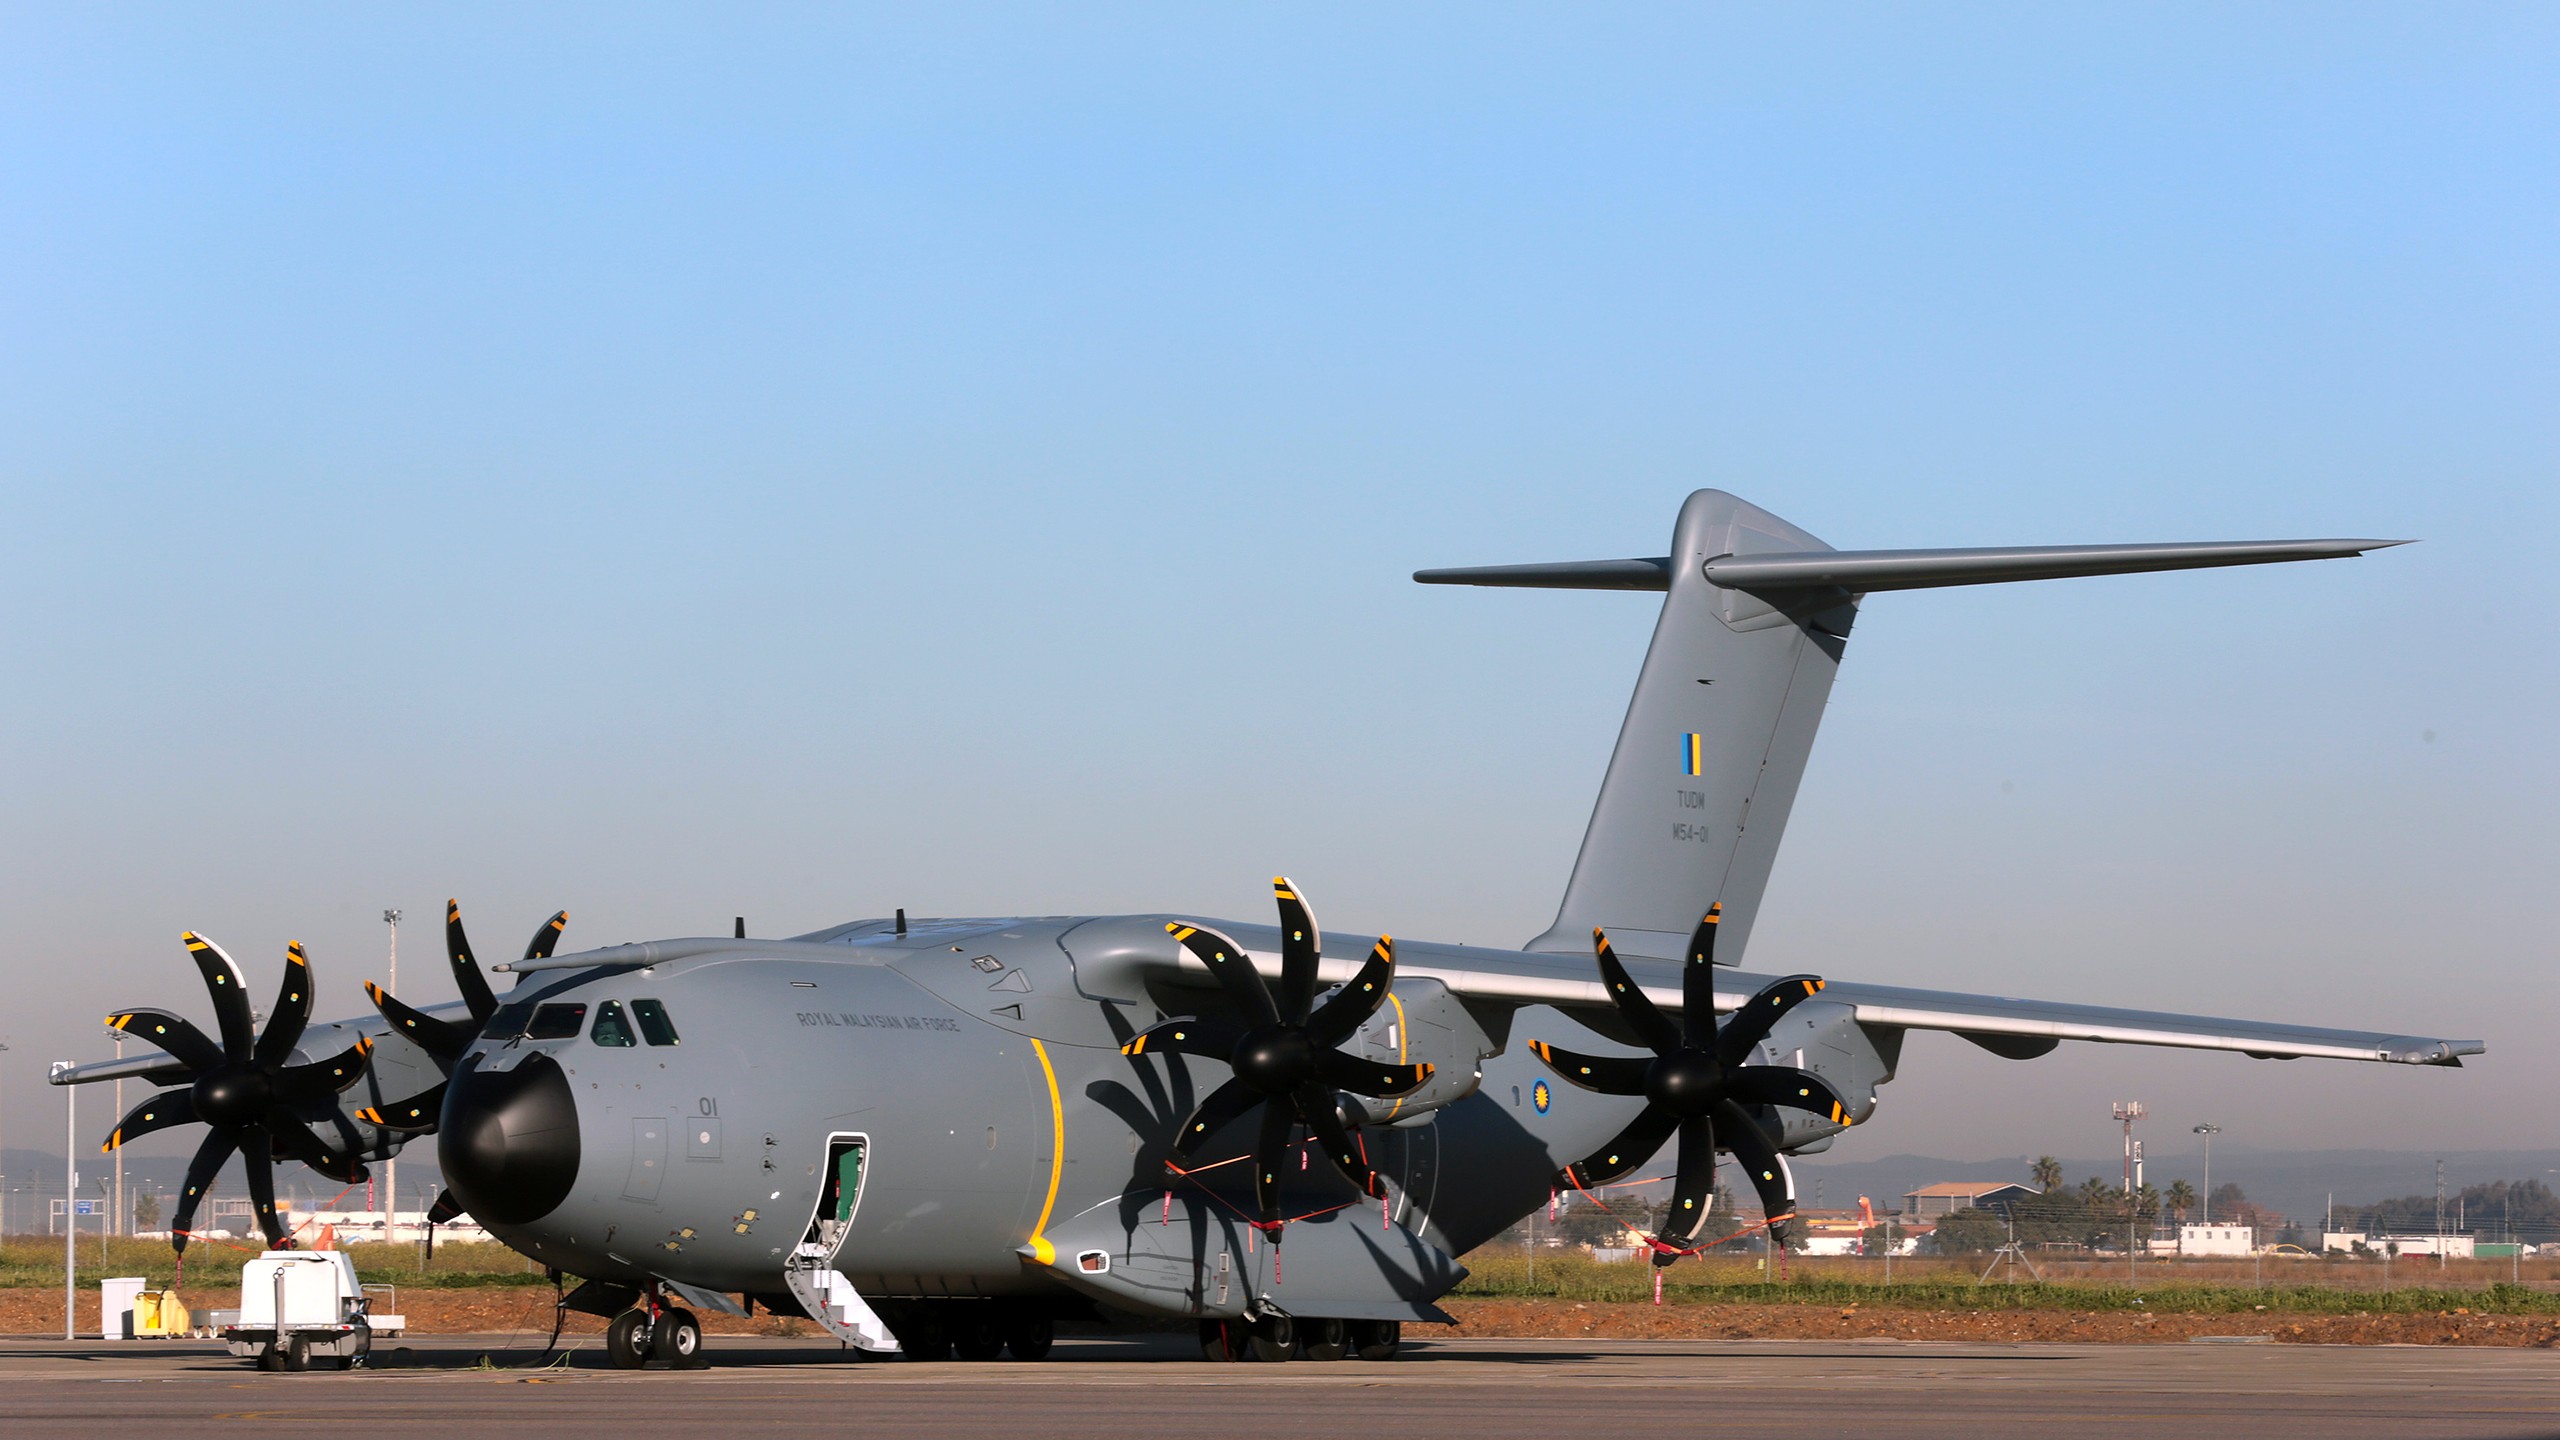 General 2560x1440 Airbus A400M Atlas military aircraft aircraft runway vehicle military vehicle military Royal Malaysian Air Force Airbus french aircraft transport